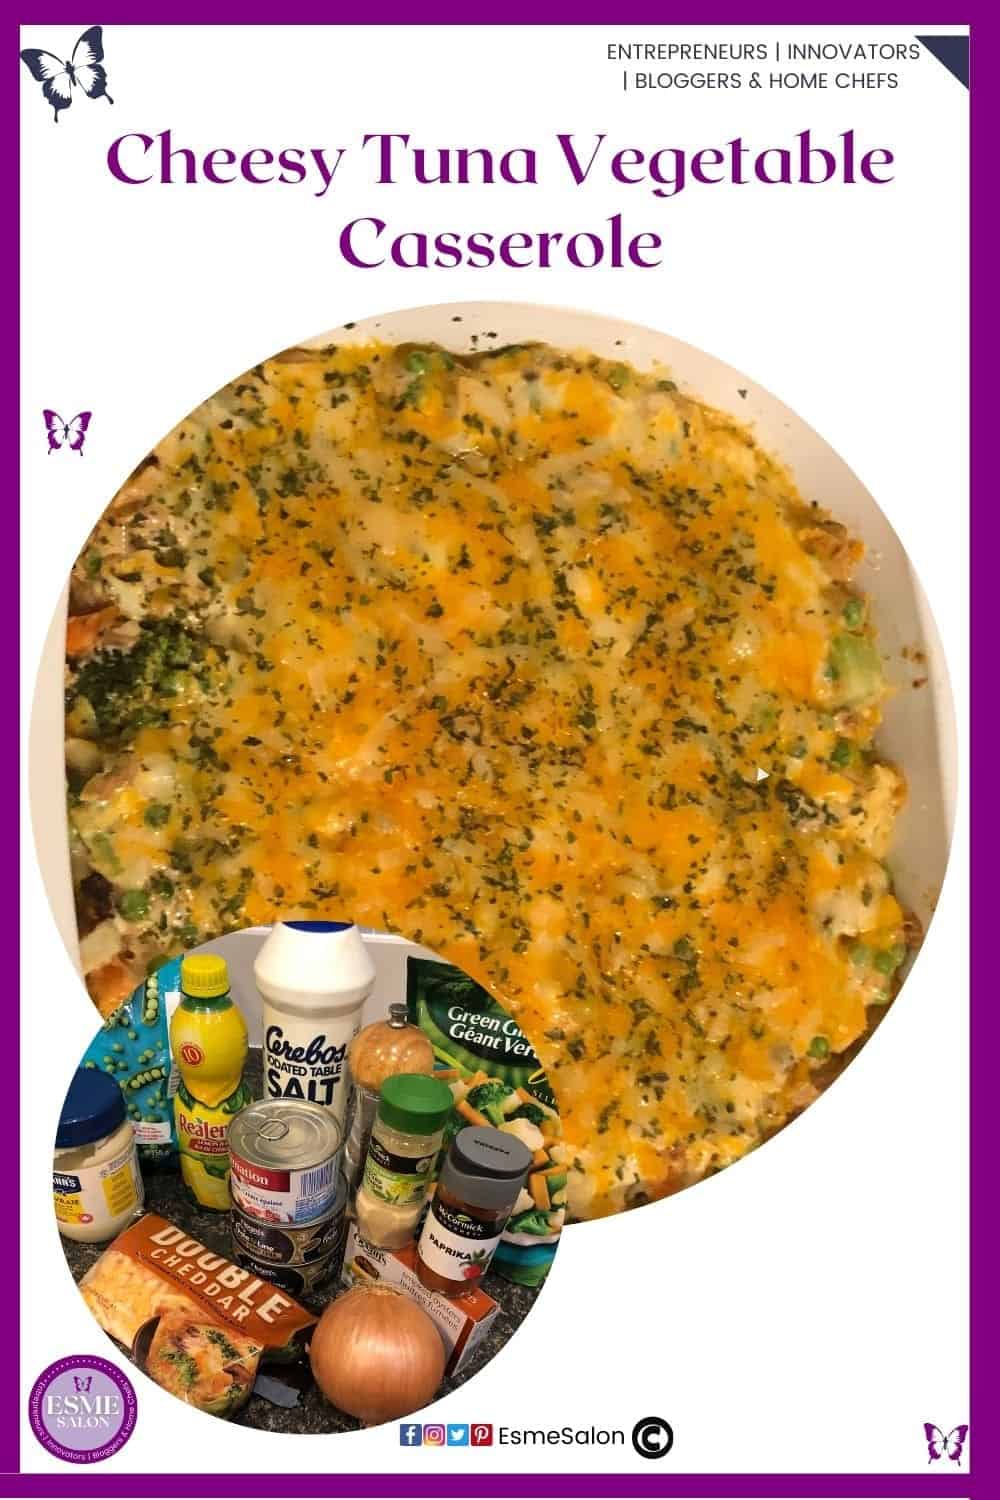 an image of a Cheesy Tuna Vegetable Casserole baked dish as well as ingredients